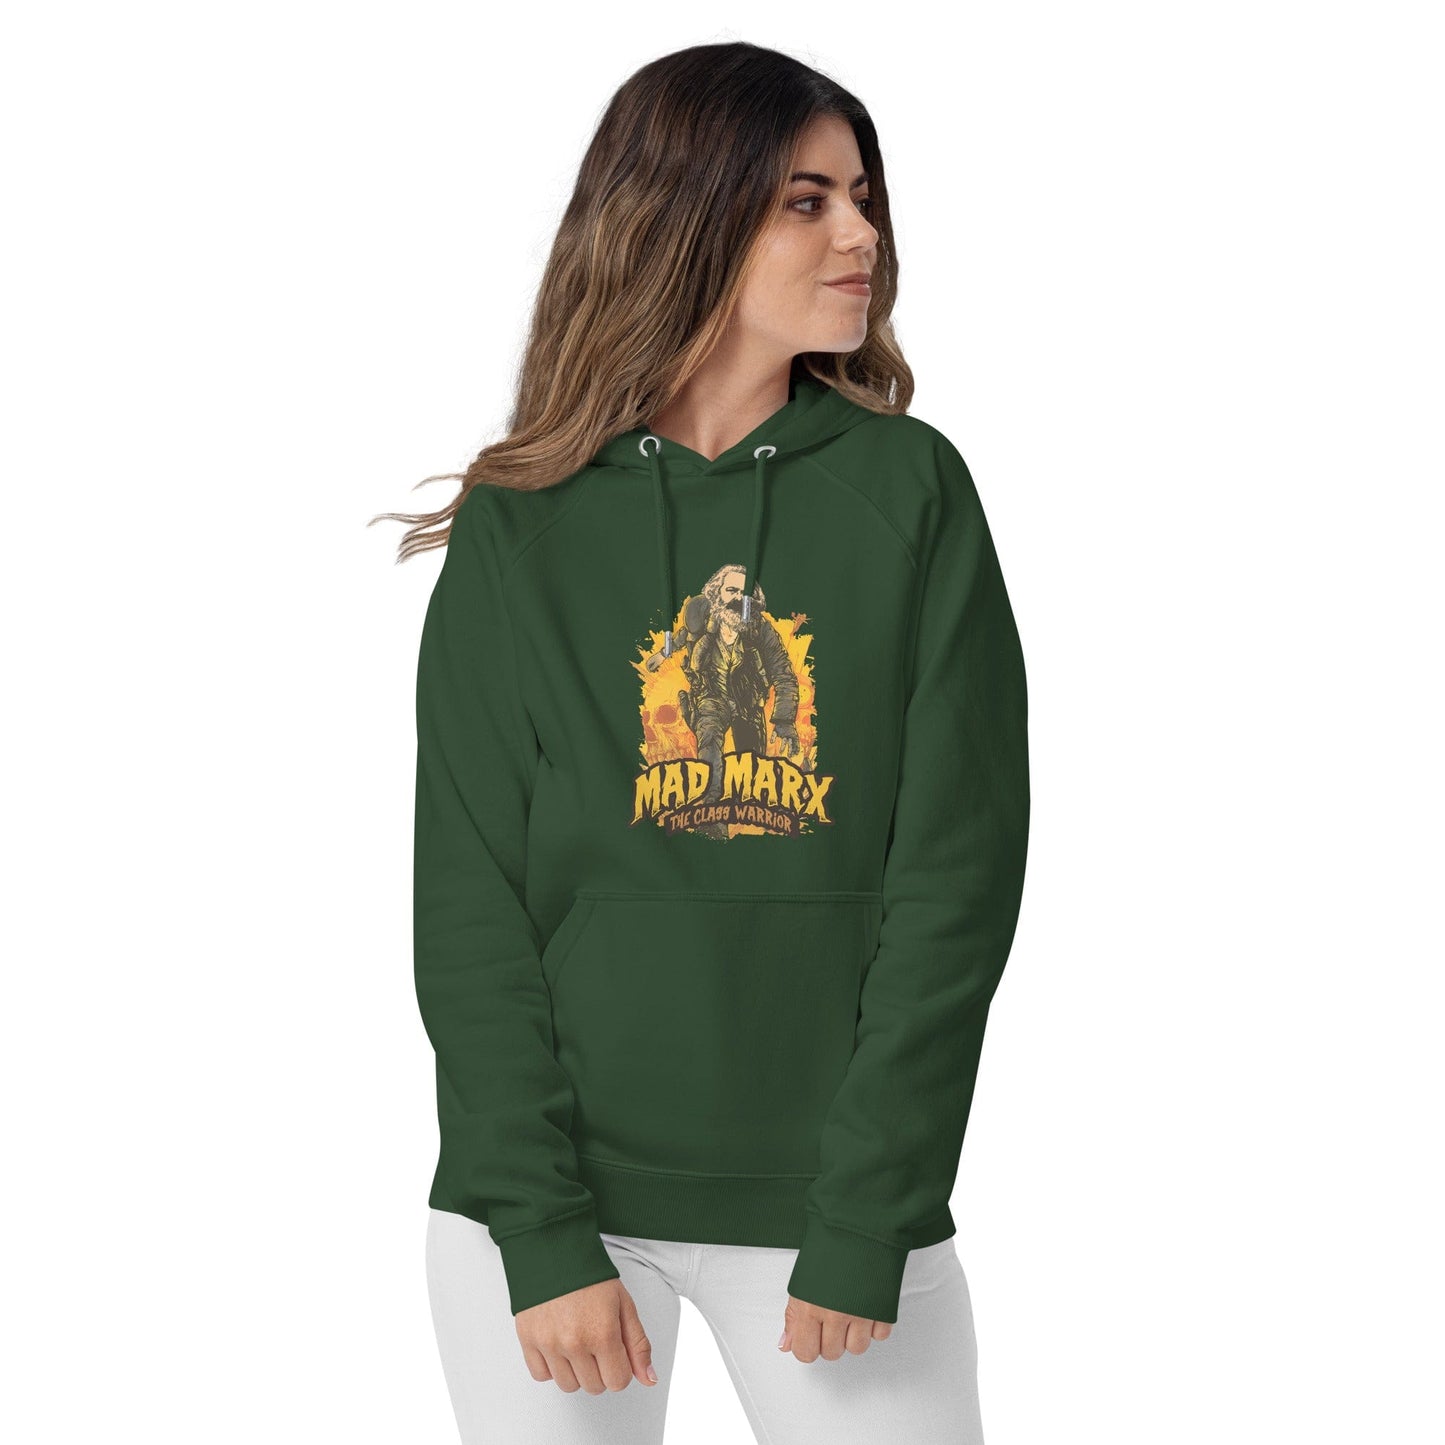 Mad Marx - The Class Warrior - Eco Hoodie